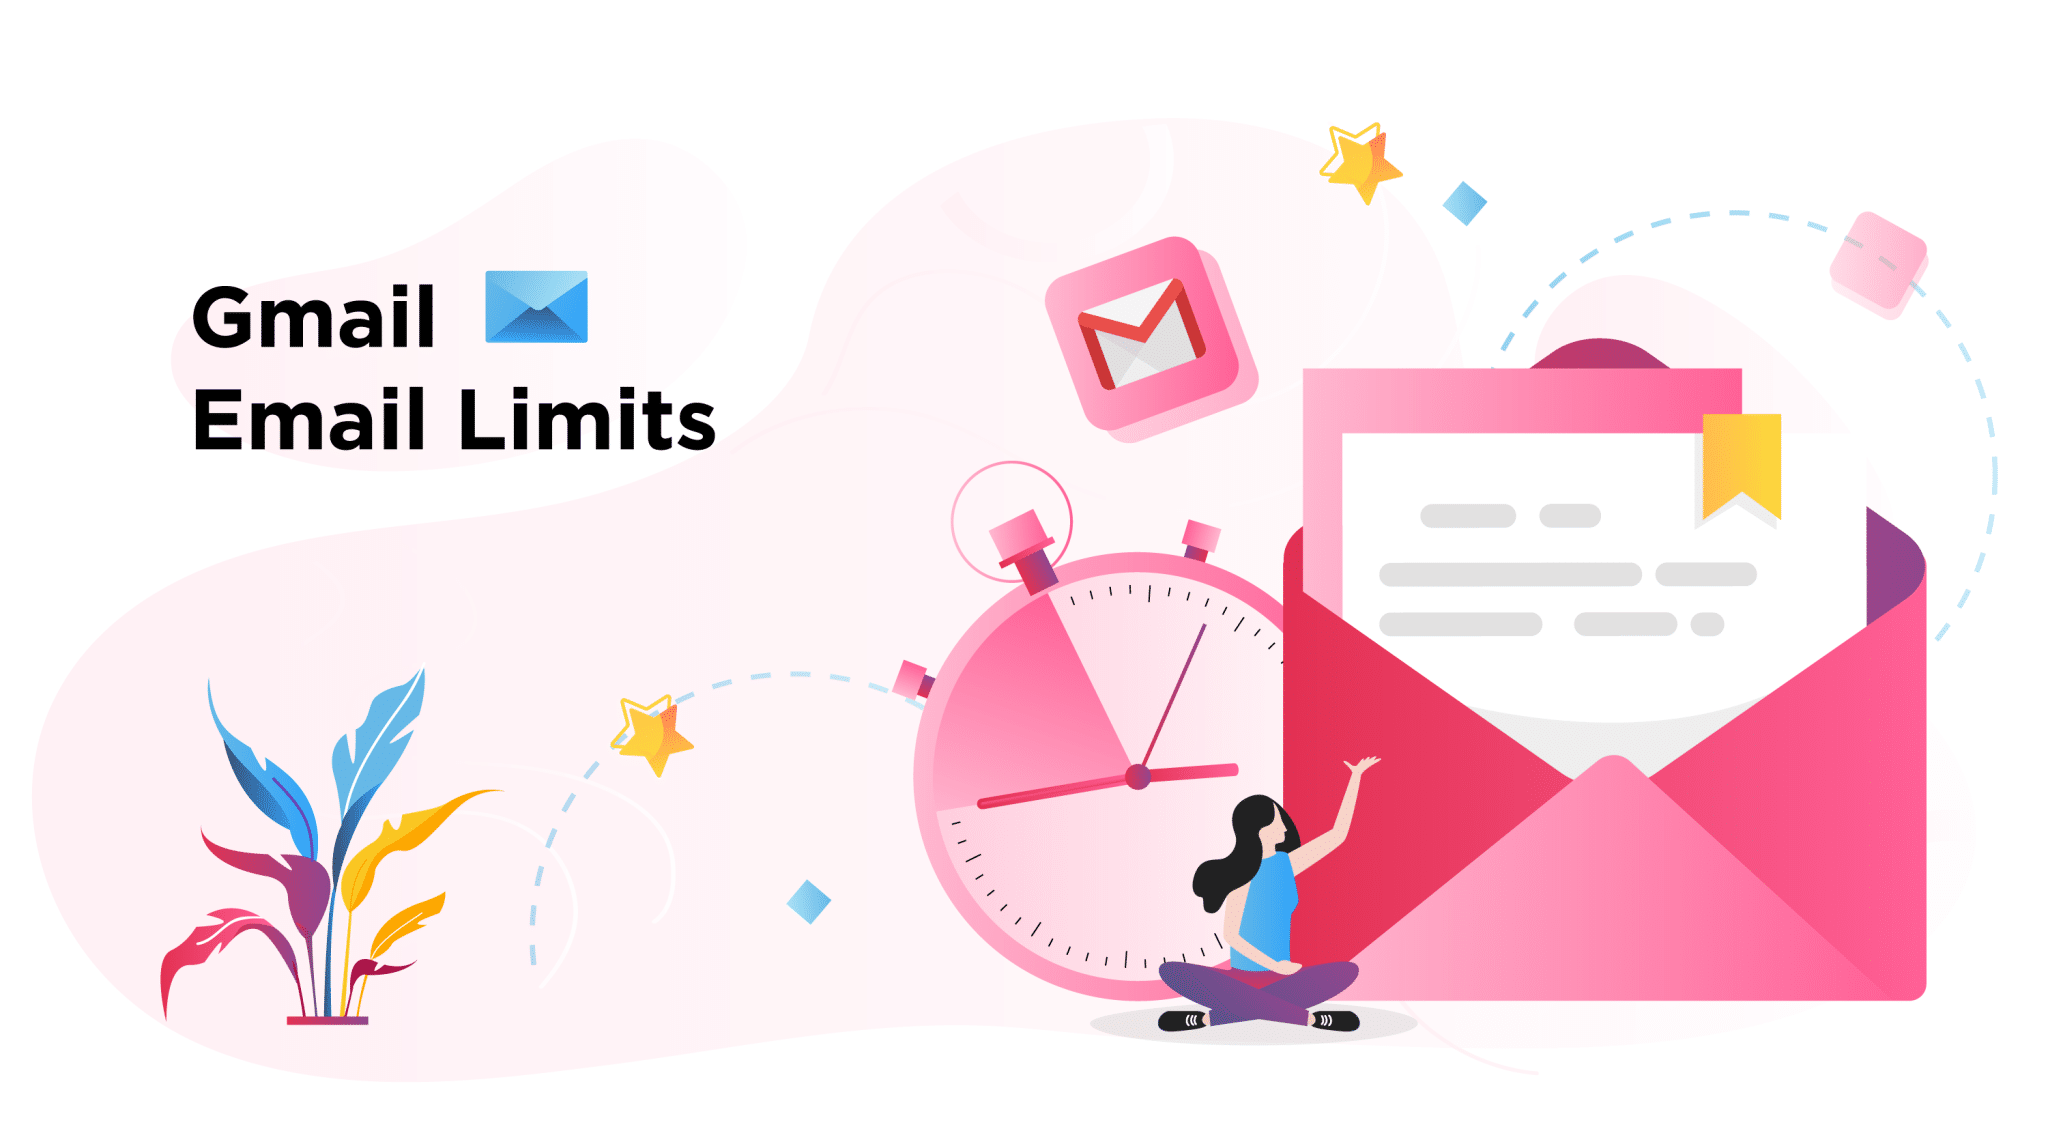 Gmail email limits